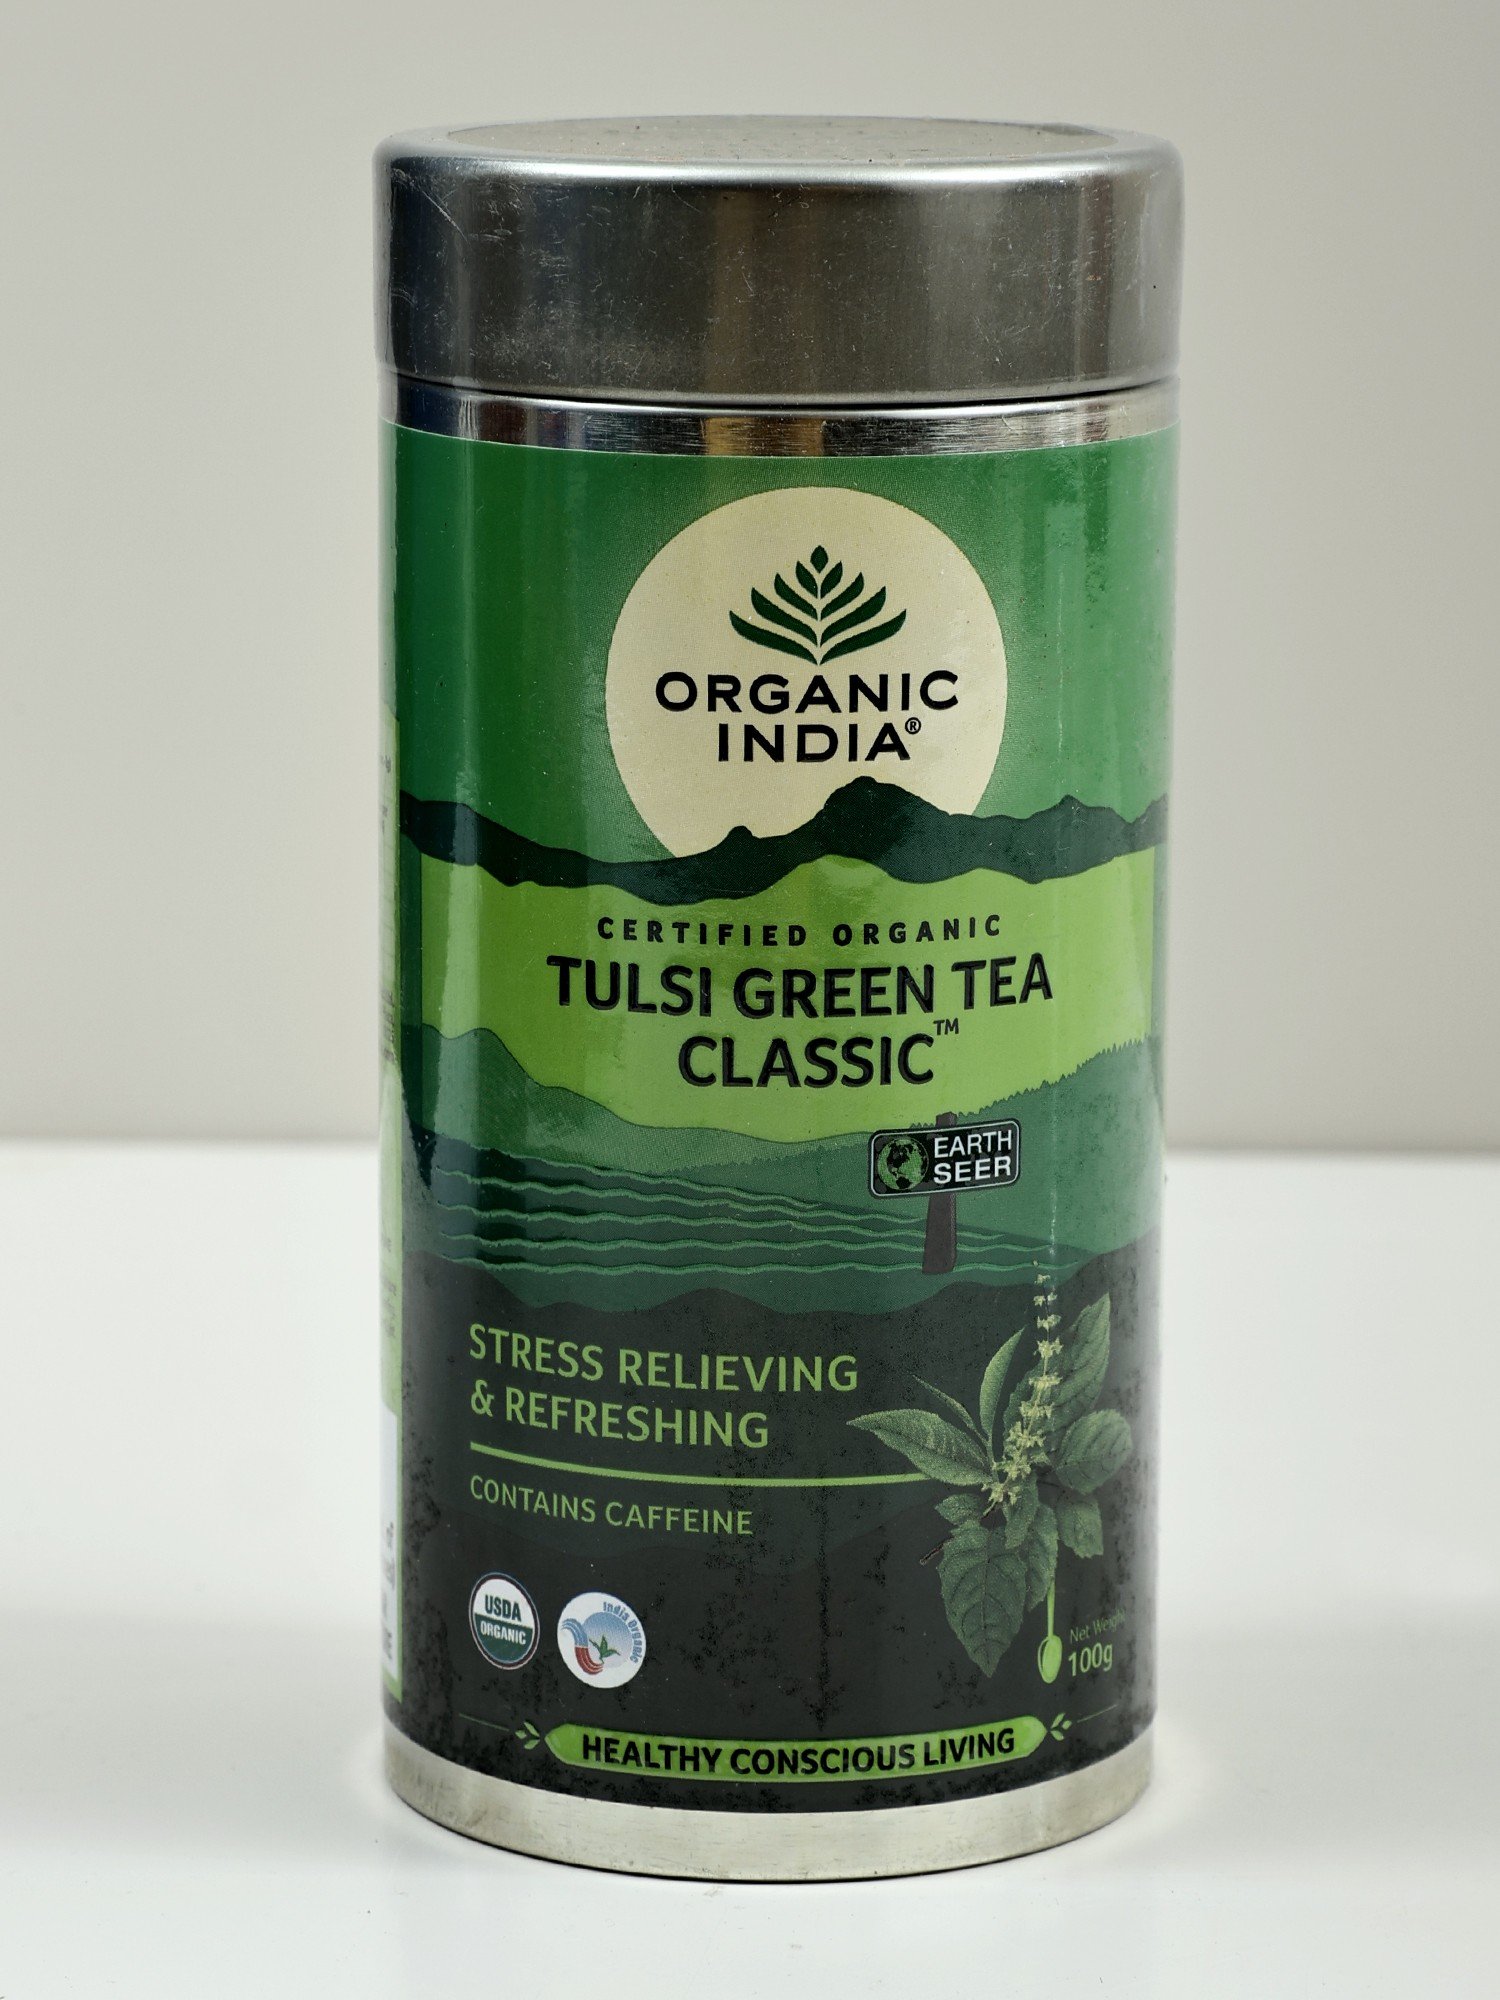 Organic India- The Original Tulsi Green Tea (A Slimming and vitalizing blend of the finest Tulsi & premium Green Tea) 100% Organic Stress Relieving & Slimming, Rich in Antioxidants - book cover